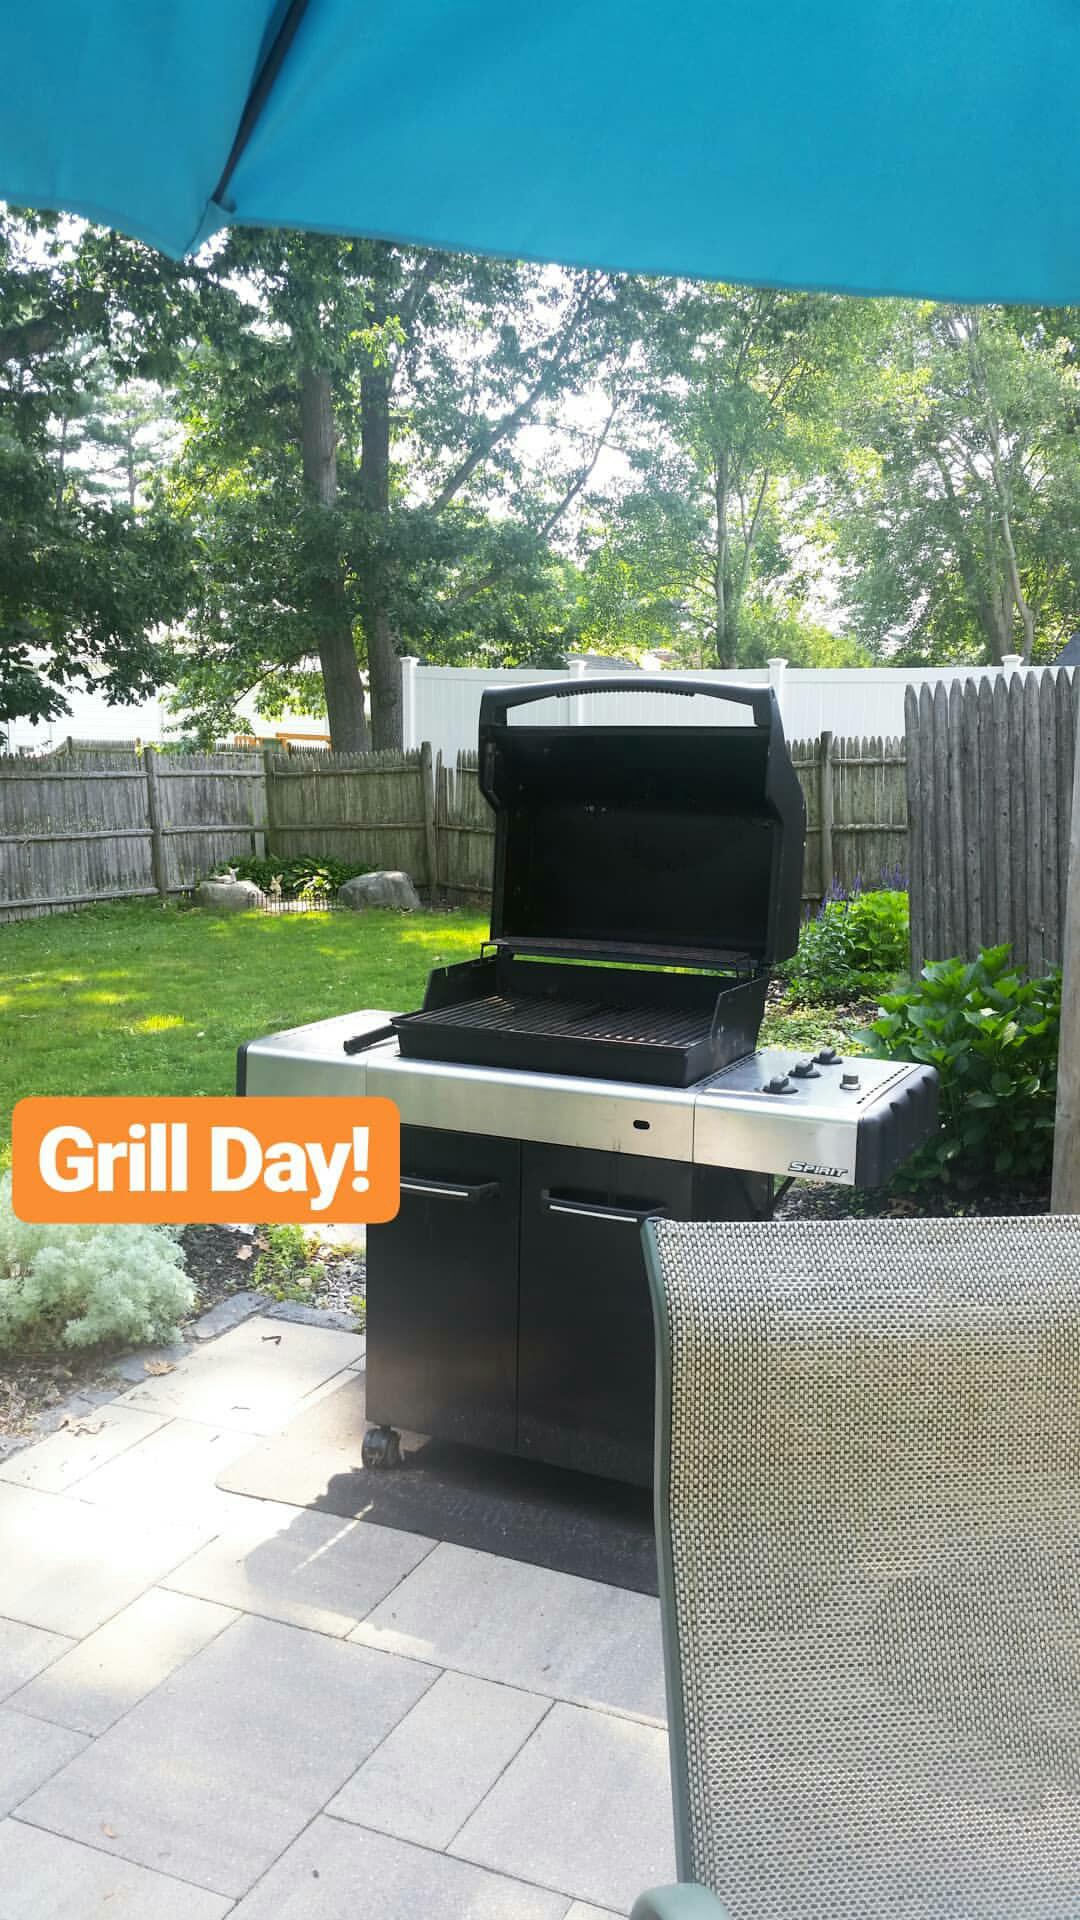 Grill day